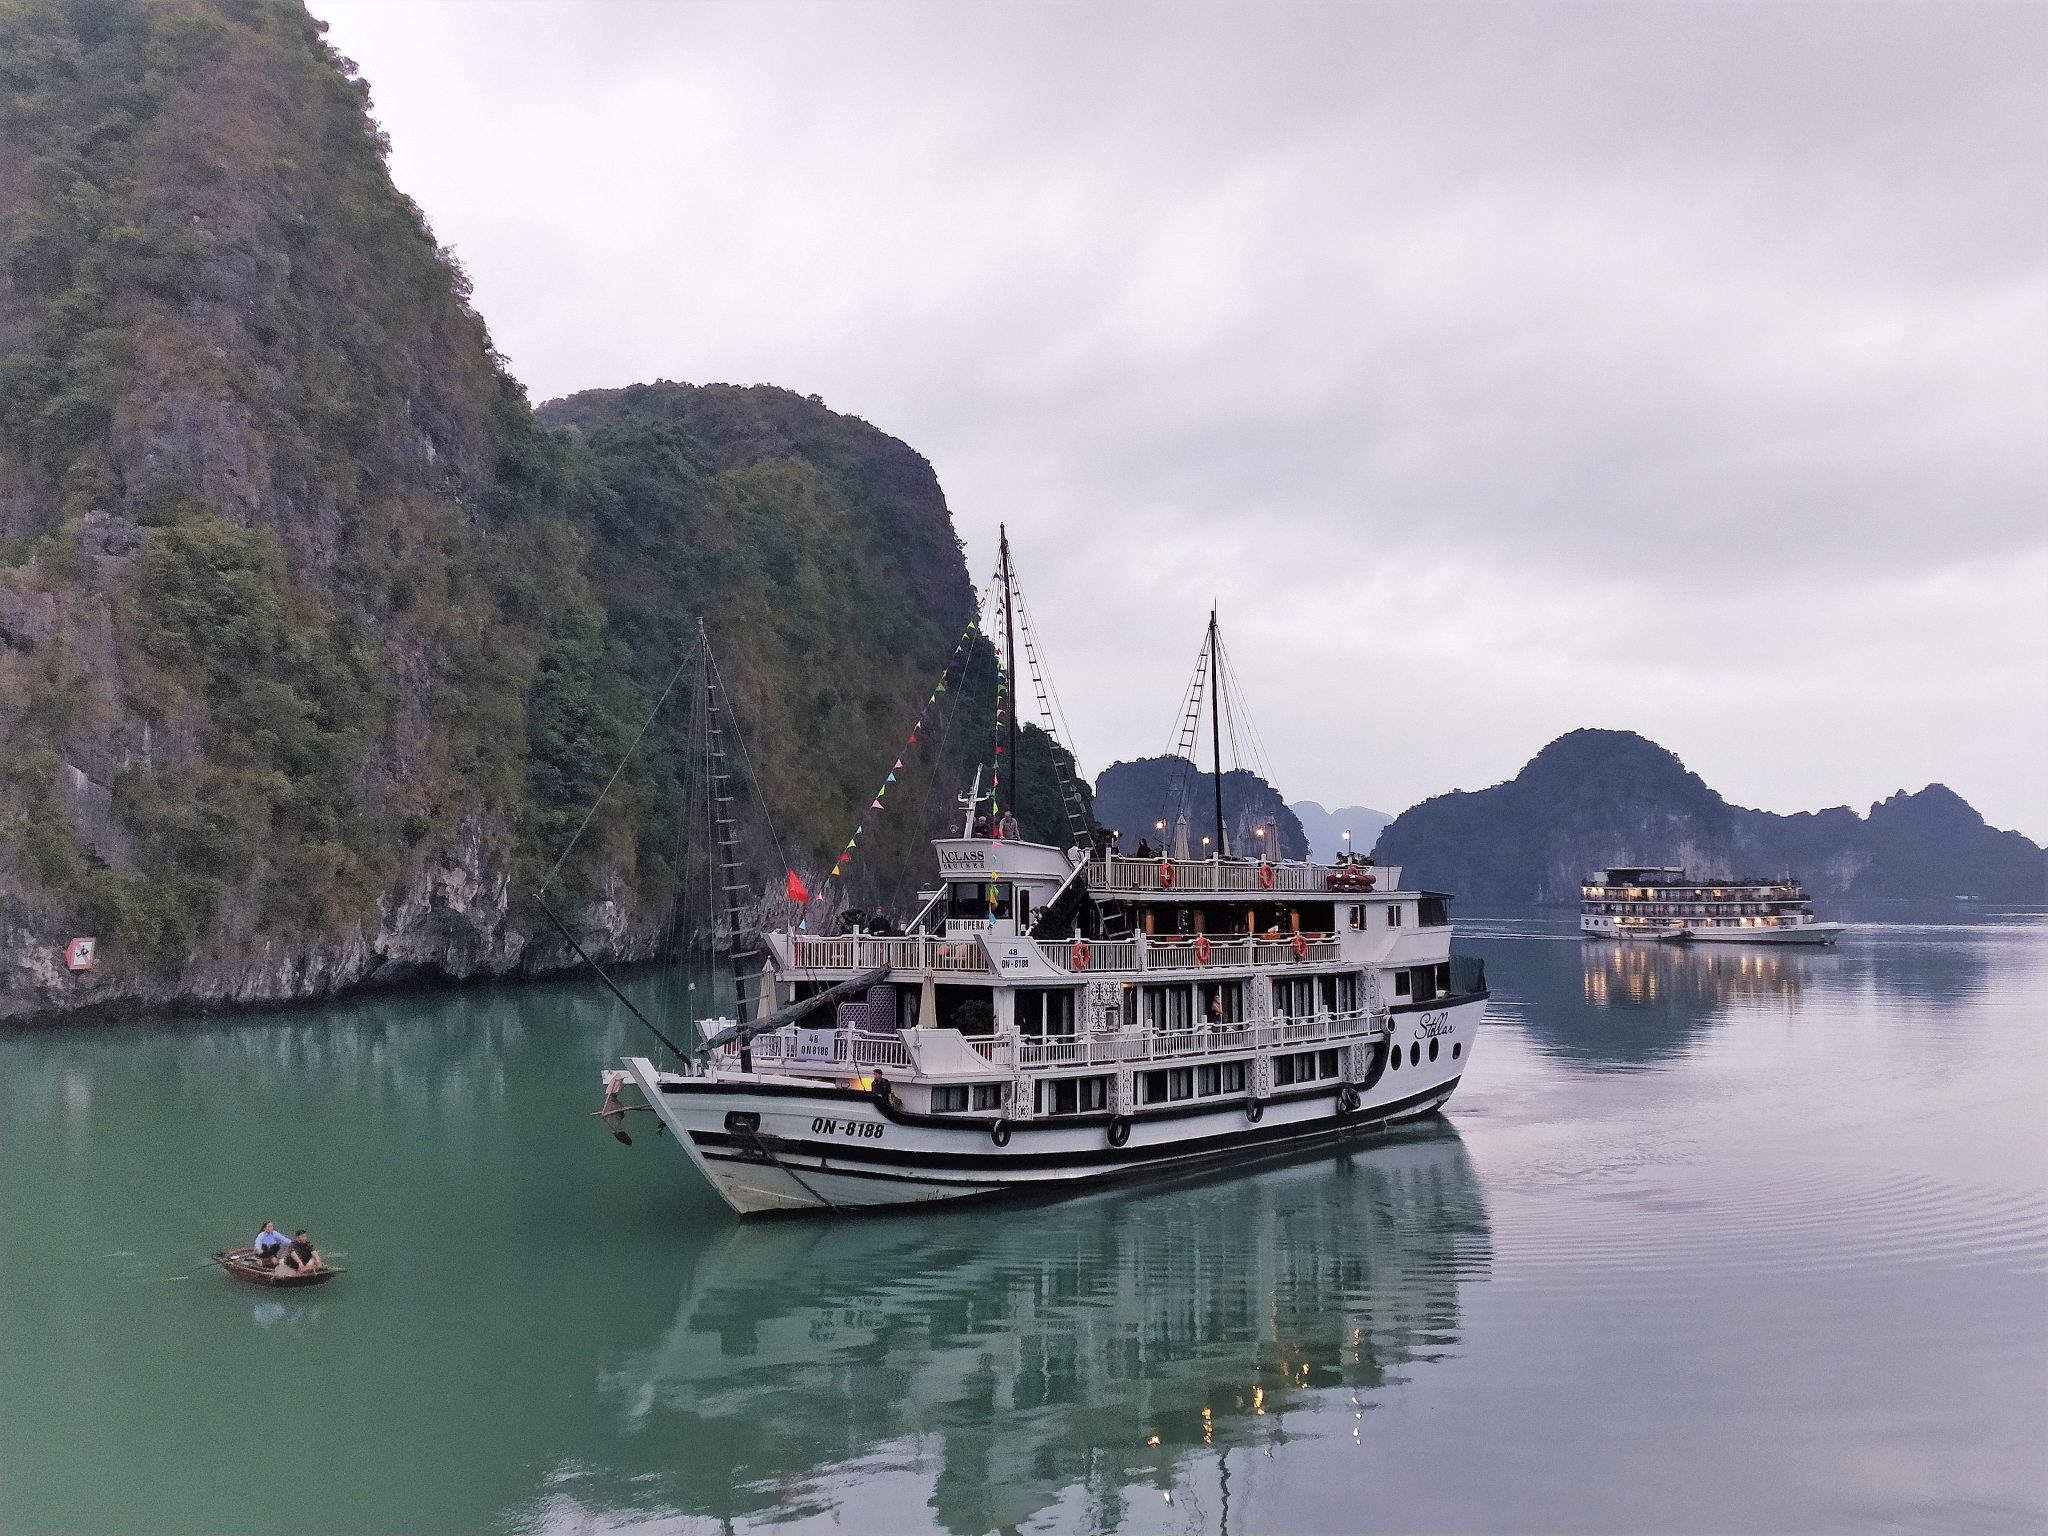 Halong Bay – 2 Days 1 Night Cruise Travel Guide - Go See Orbis